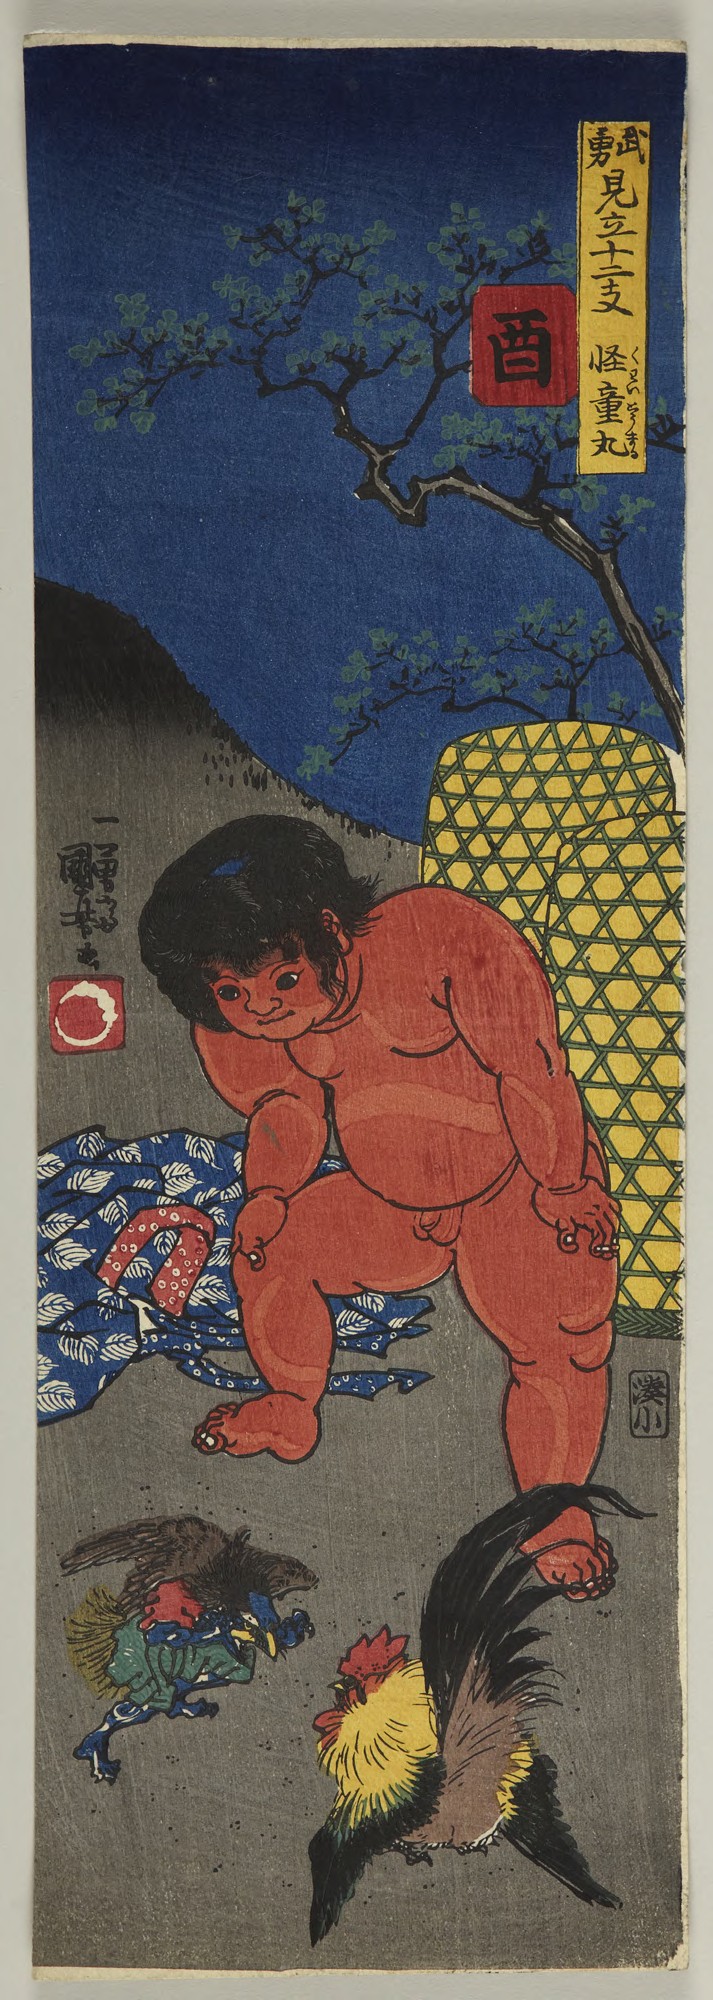 Rooster (Tori 酉): Kaidōmaru (怪童丸), from the series “Heroes 